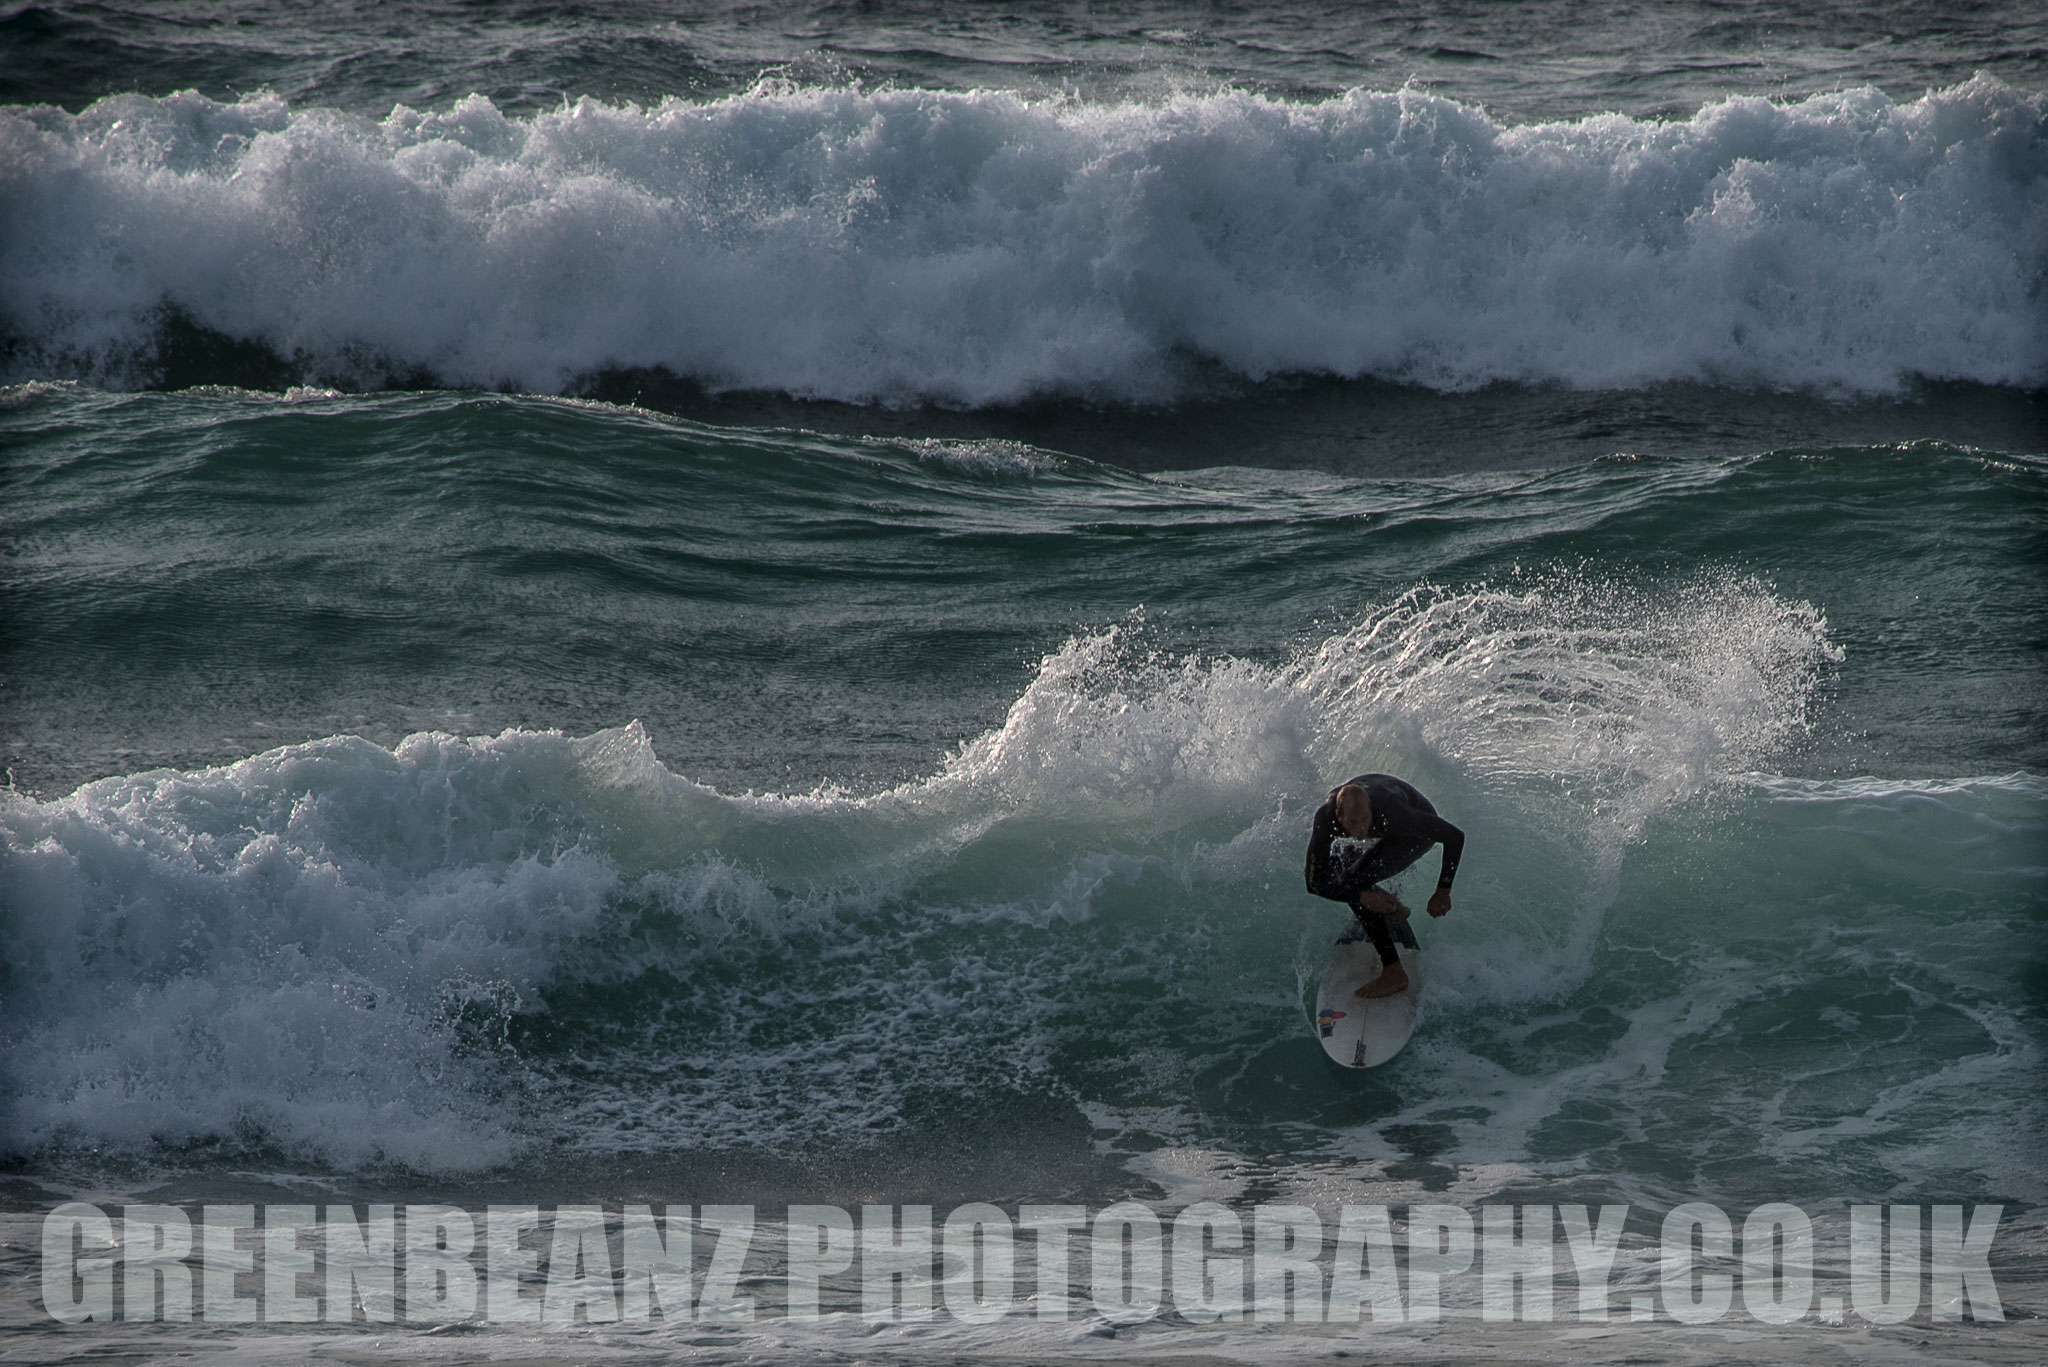 Surfer crouching on board riding a wave off the Cornish coast